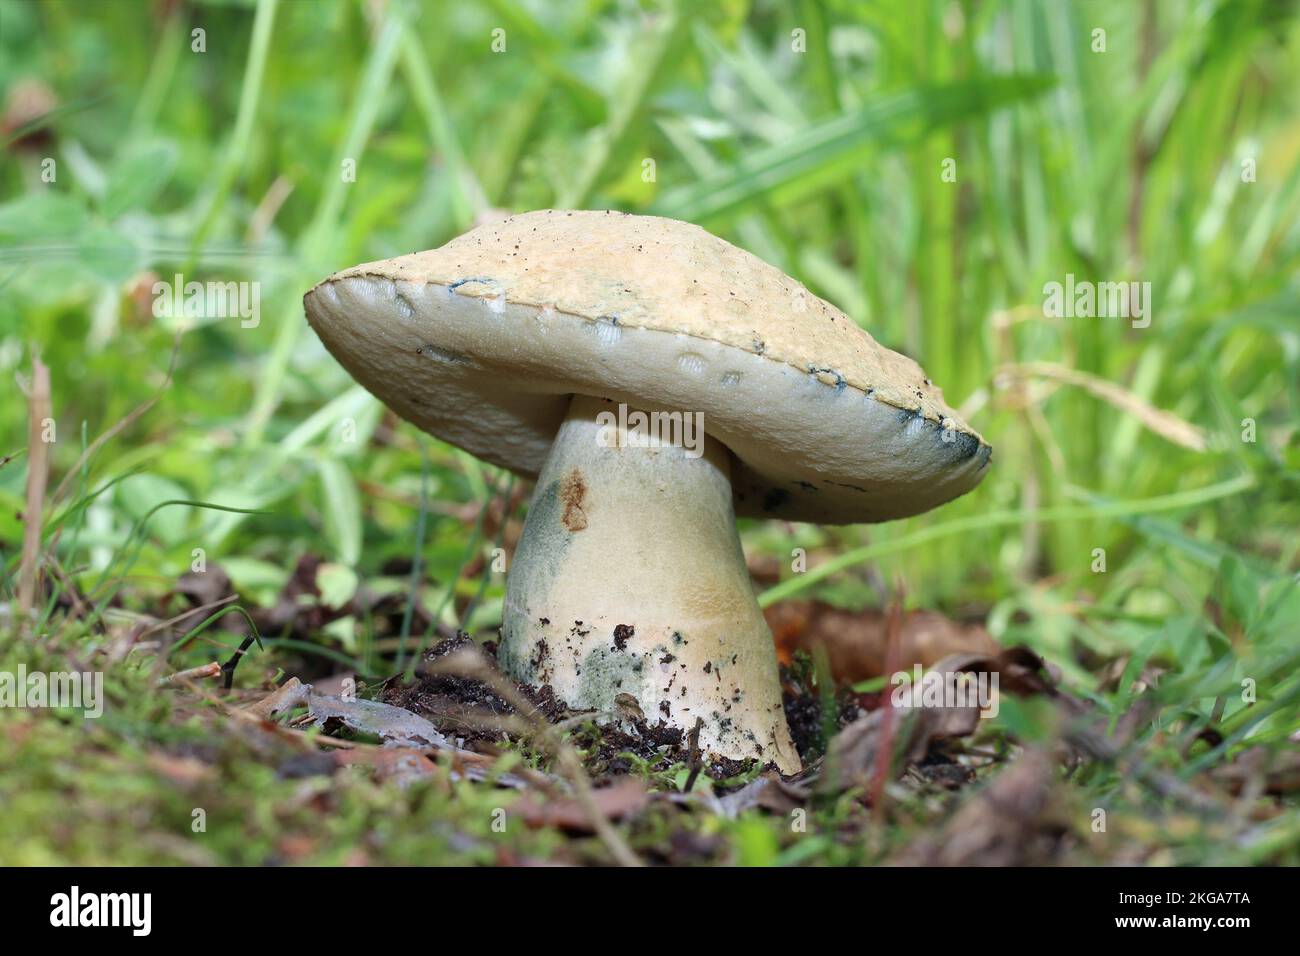 Large ripe edible mushroom Gyroporus cyanescens grows in the forest. The cap and stem are buff yellowish. The pore surface is white. Stock Photo